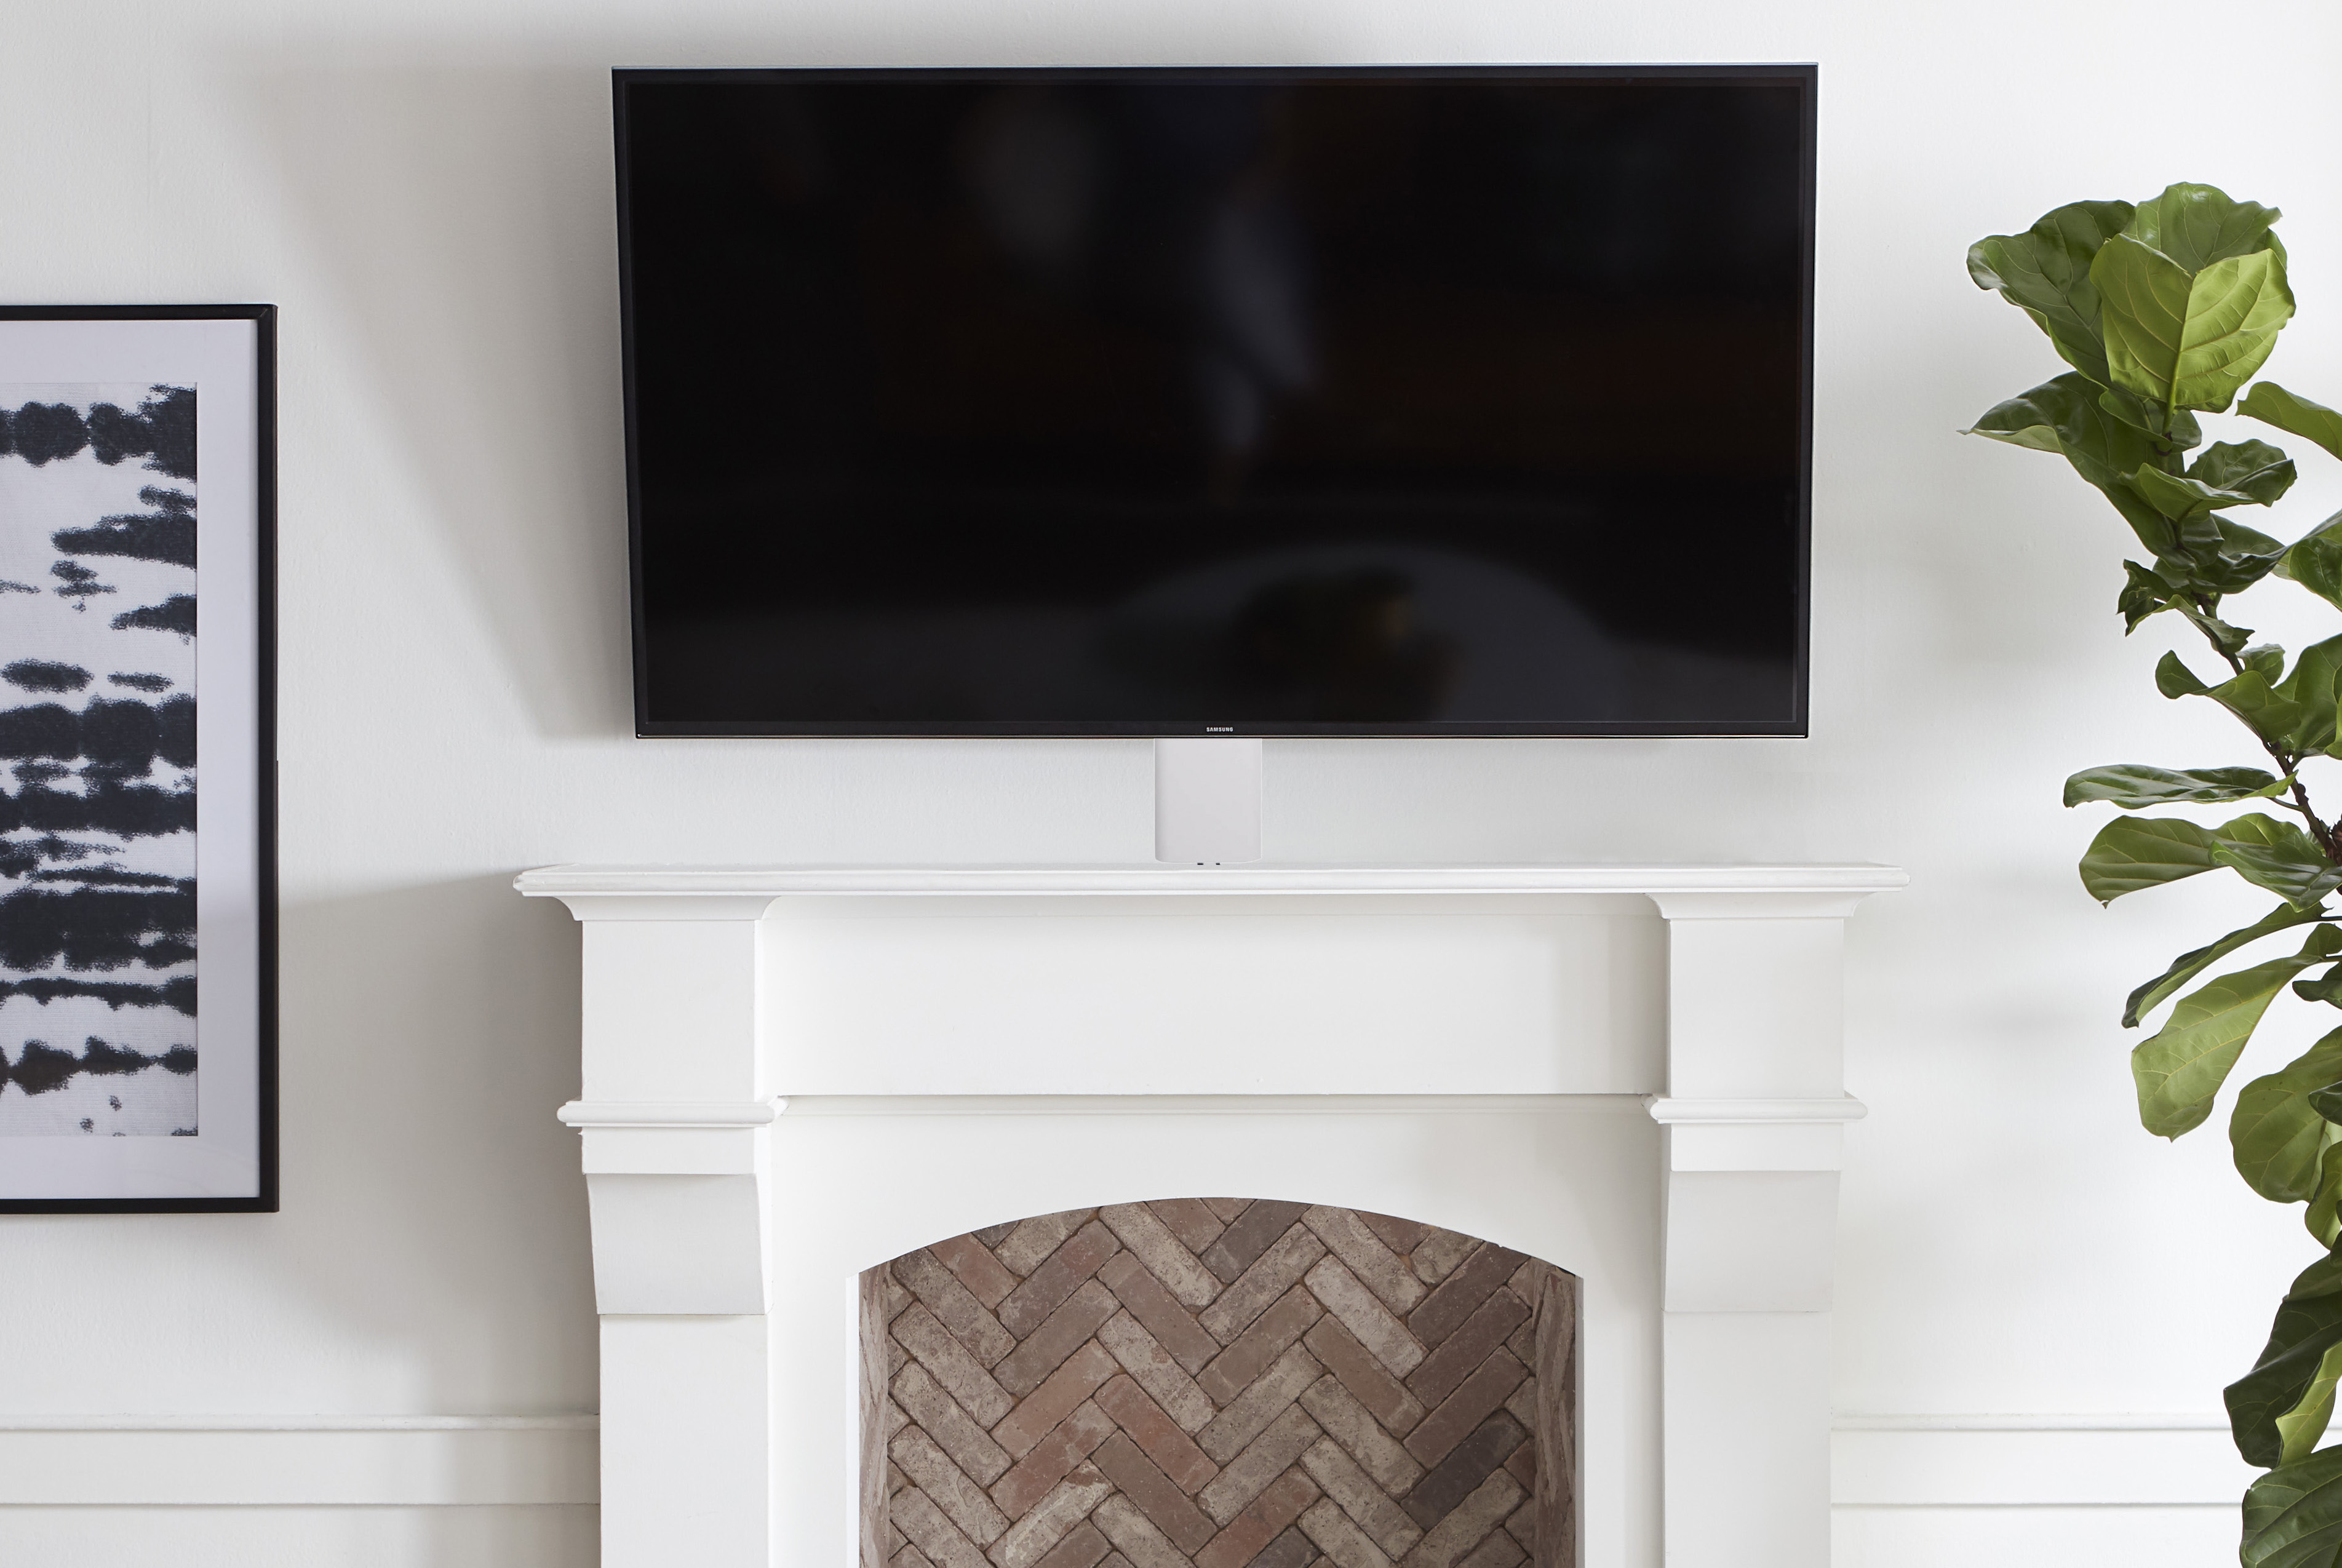 Mounting A Tv Over Fireplace How, How To Mount Flat Screen Tv Above Fireplace